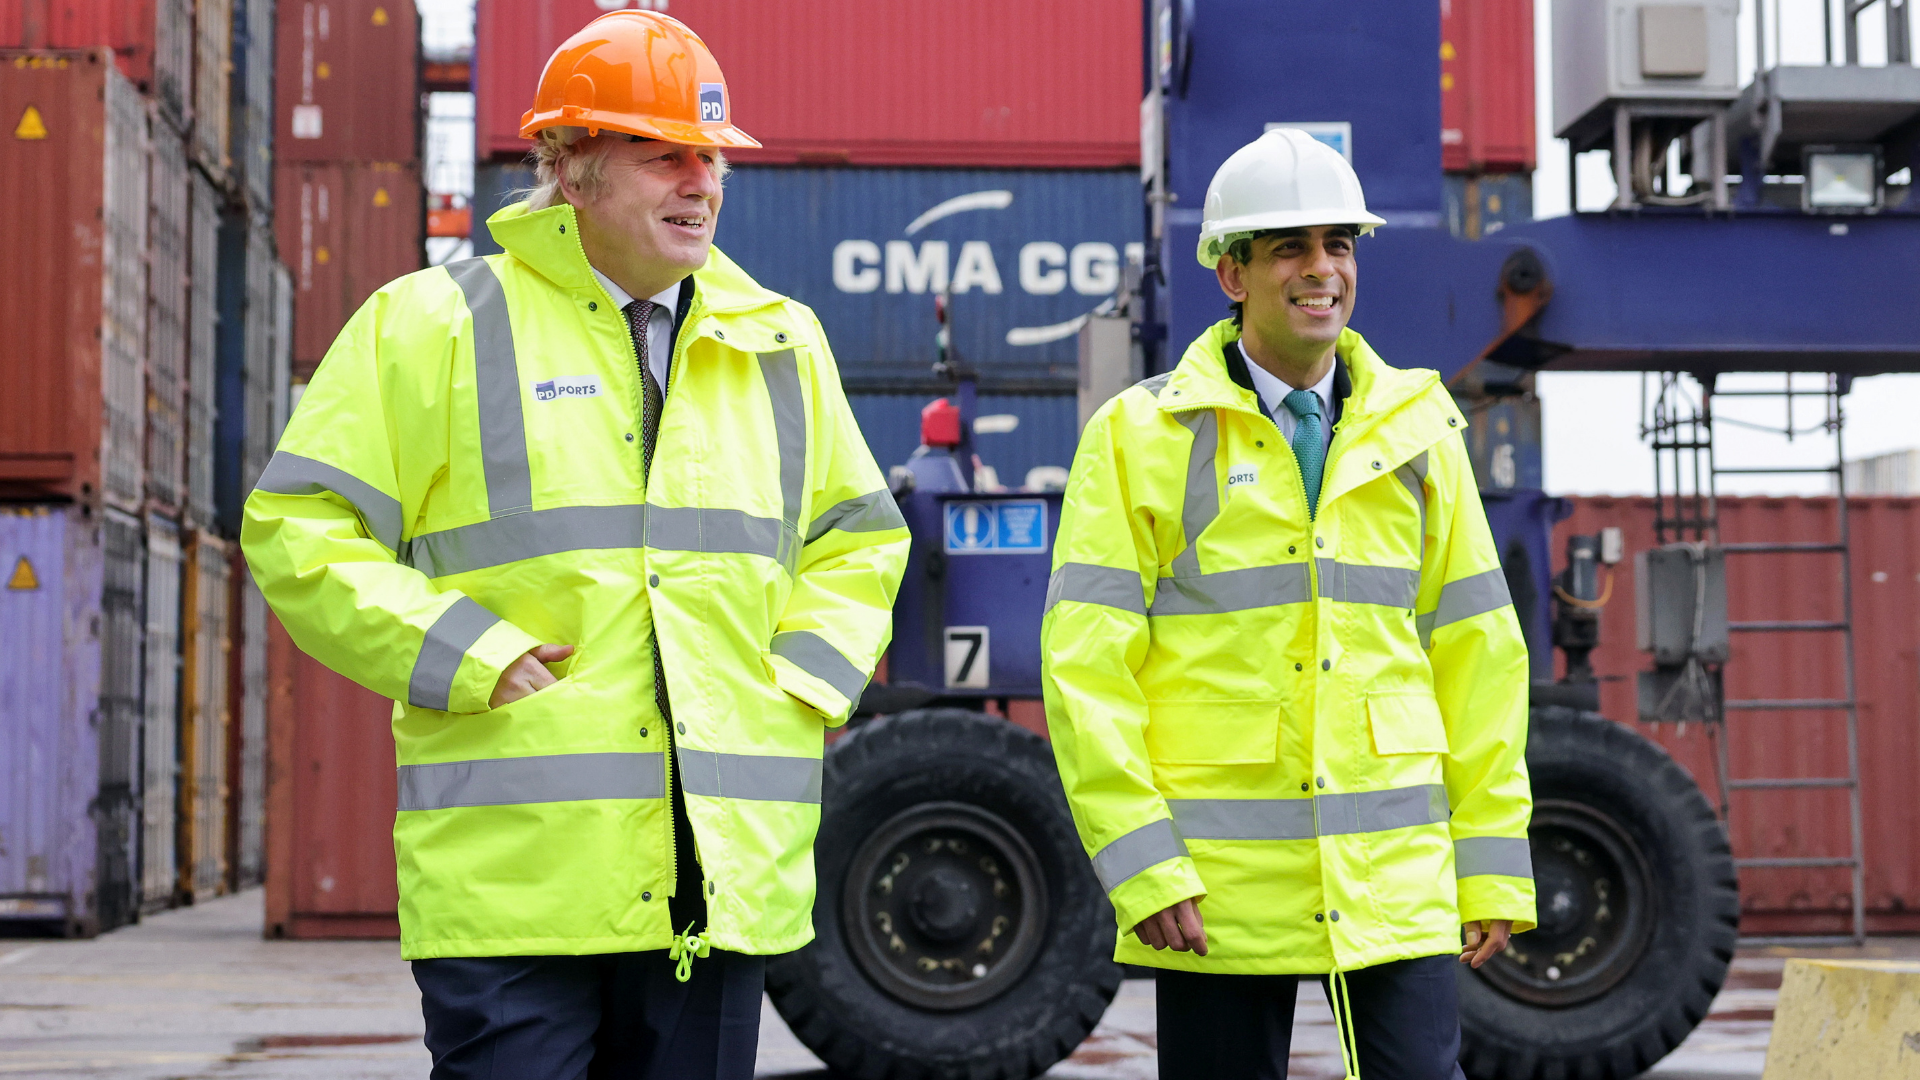 Boris Johnson and Rishi Sunak visit Teesport following the Budget, which campaigners warn has put 750,000 jobs at risk. Image credit: Number 10 / Flickr